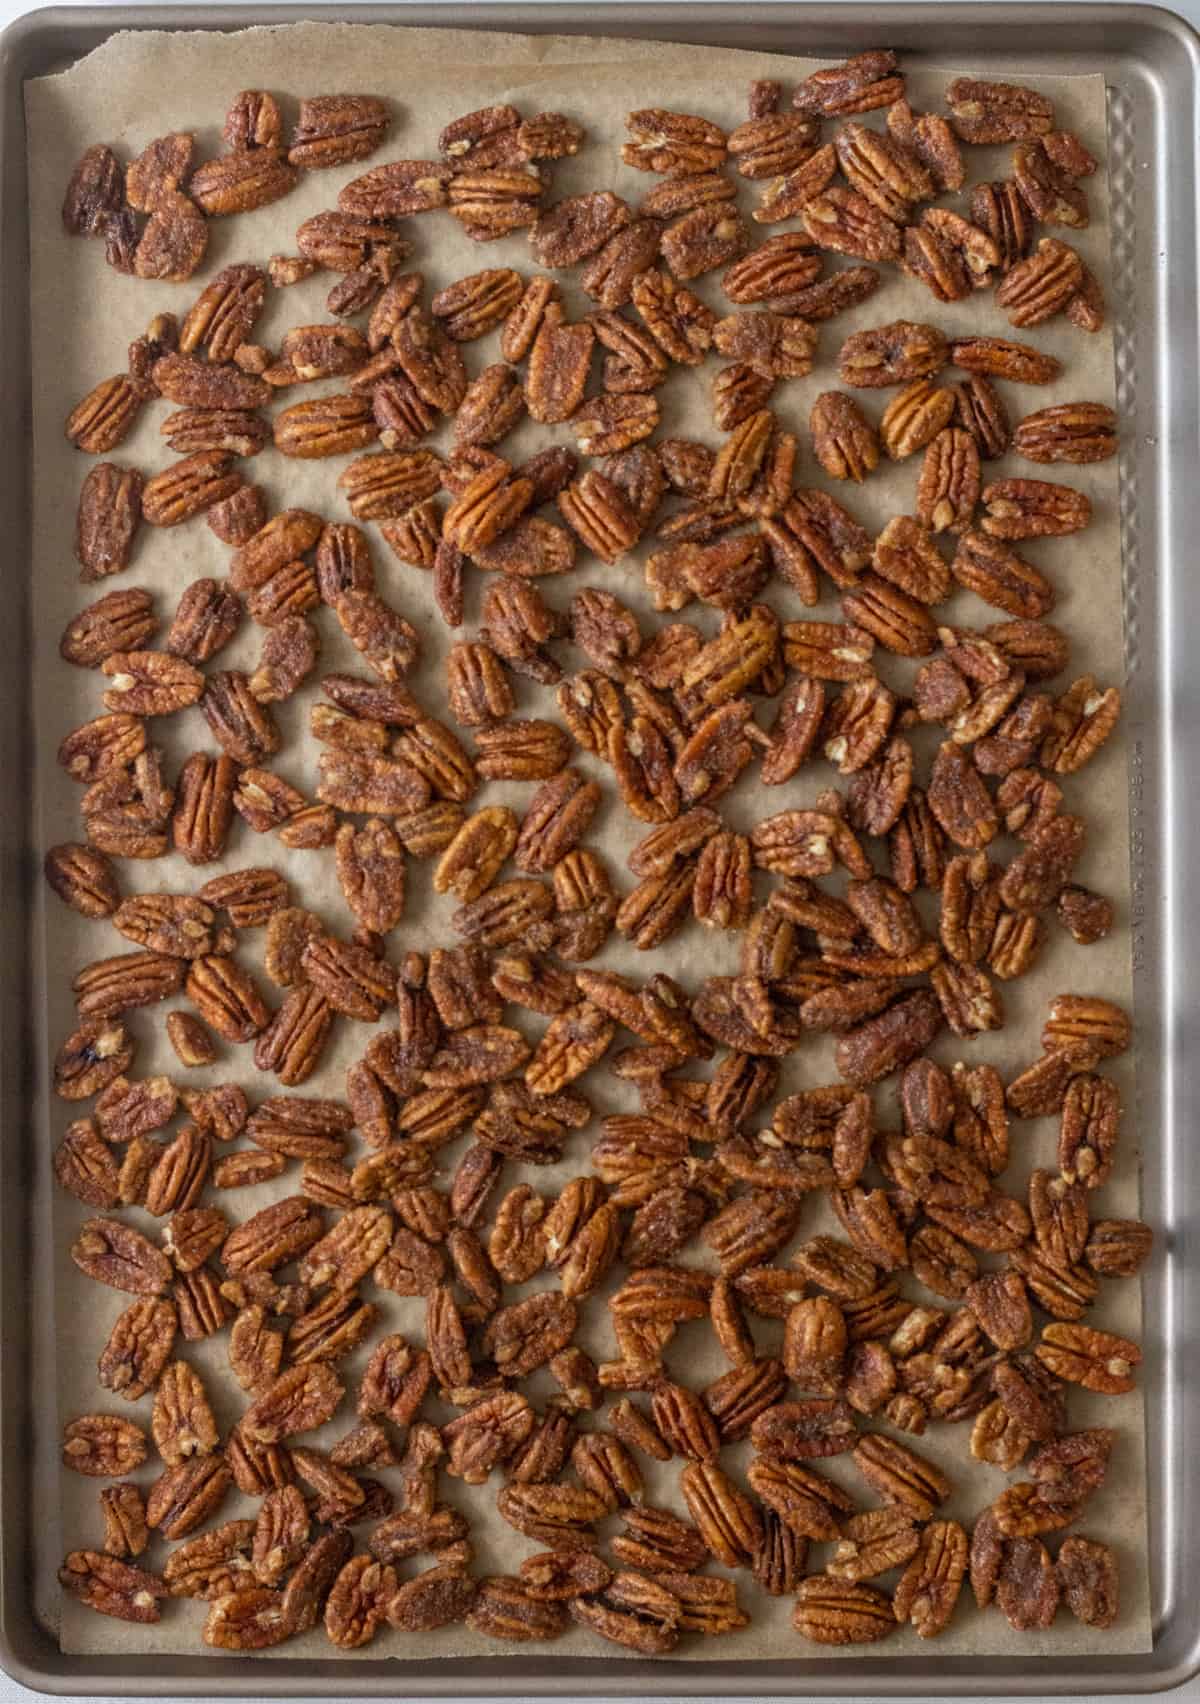 Candy coated pecan halves spread out on a parchment lined baking sheet.